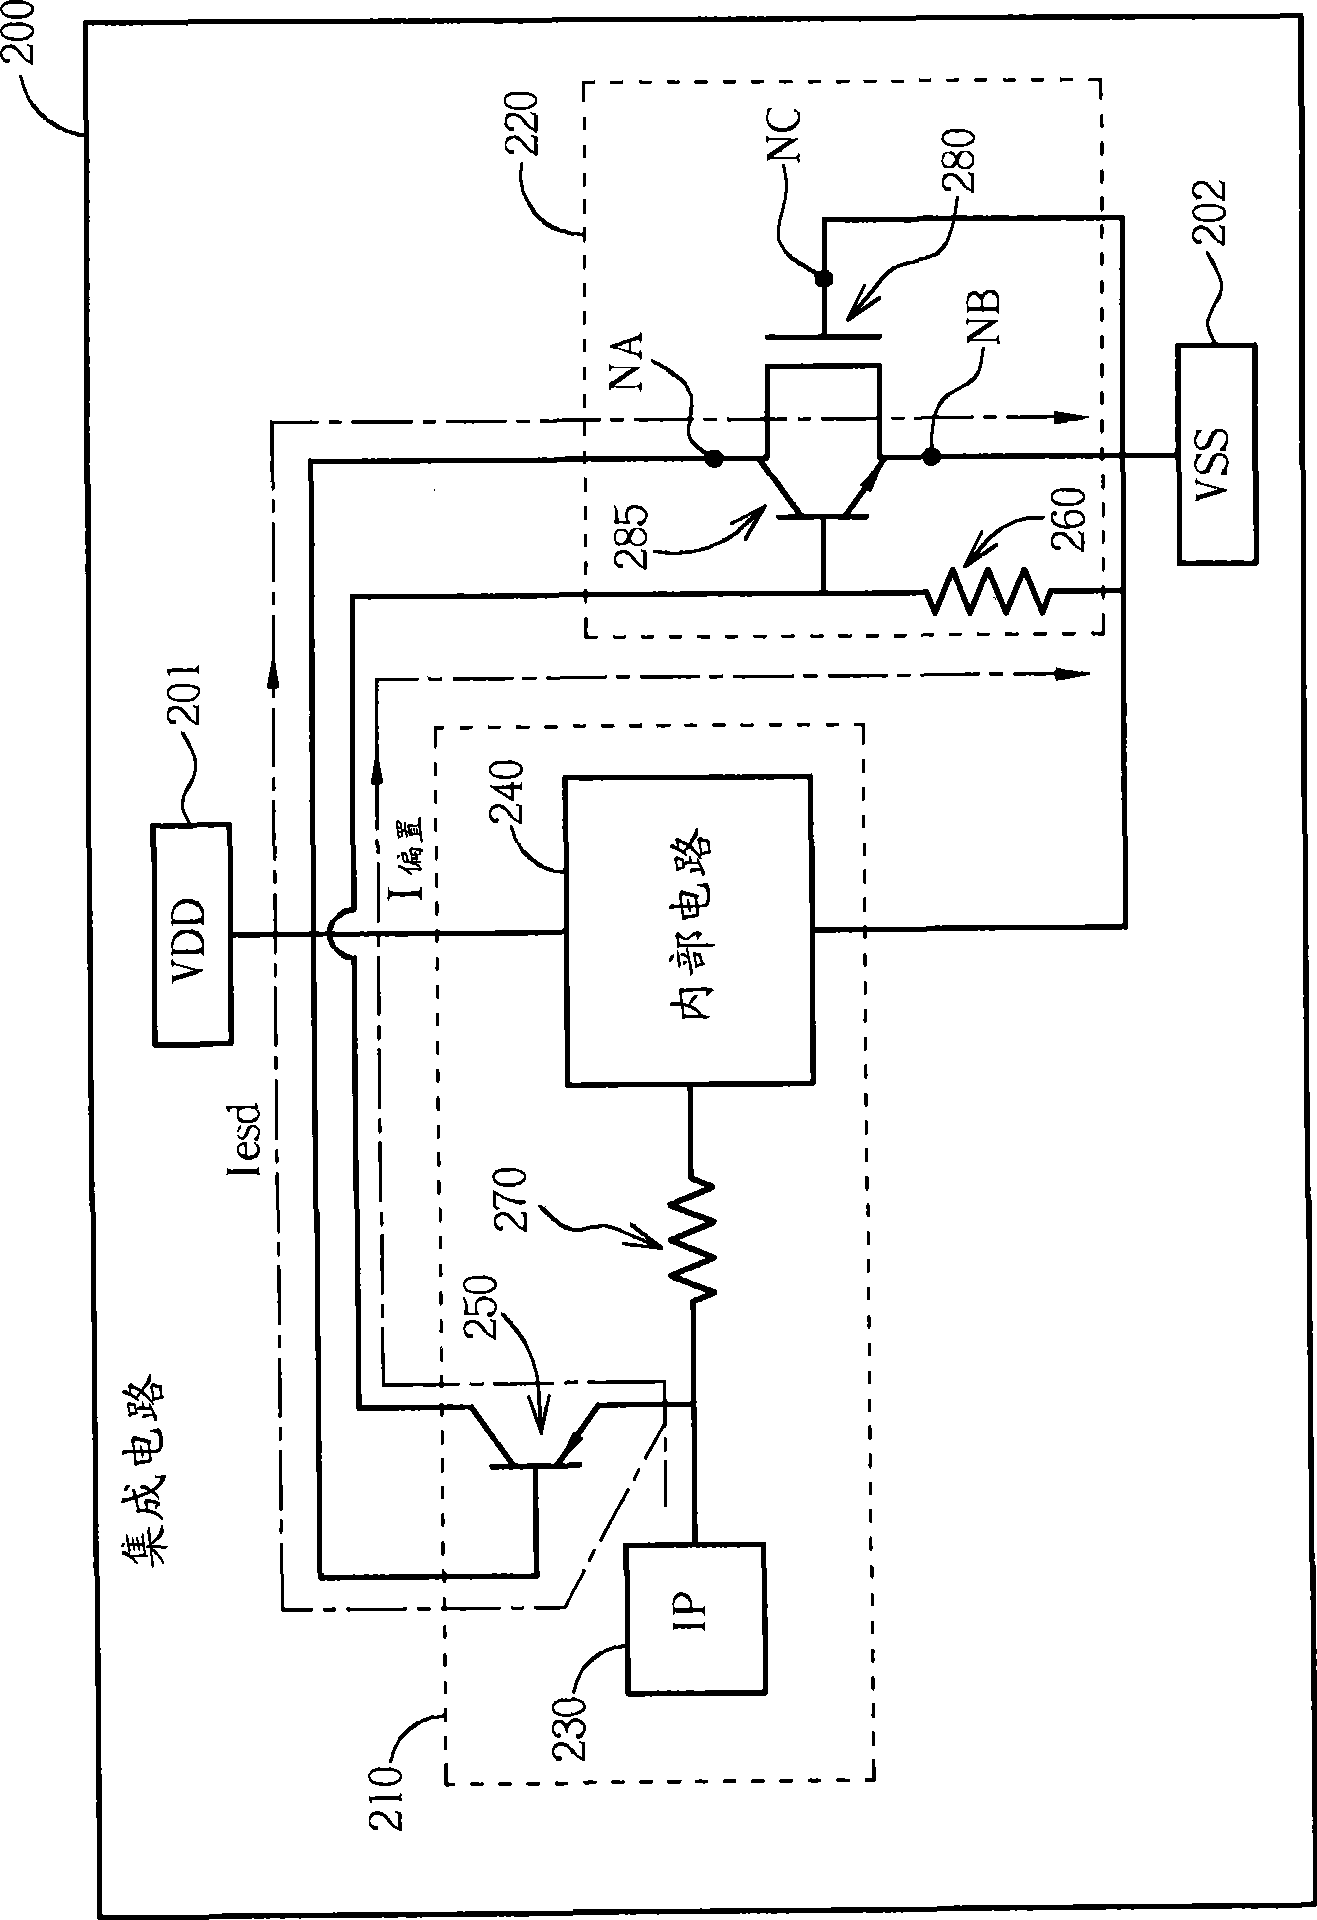 Integrated circuit with electrostatic discharge protecting circuit